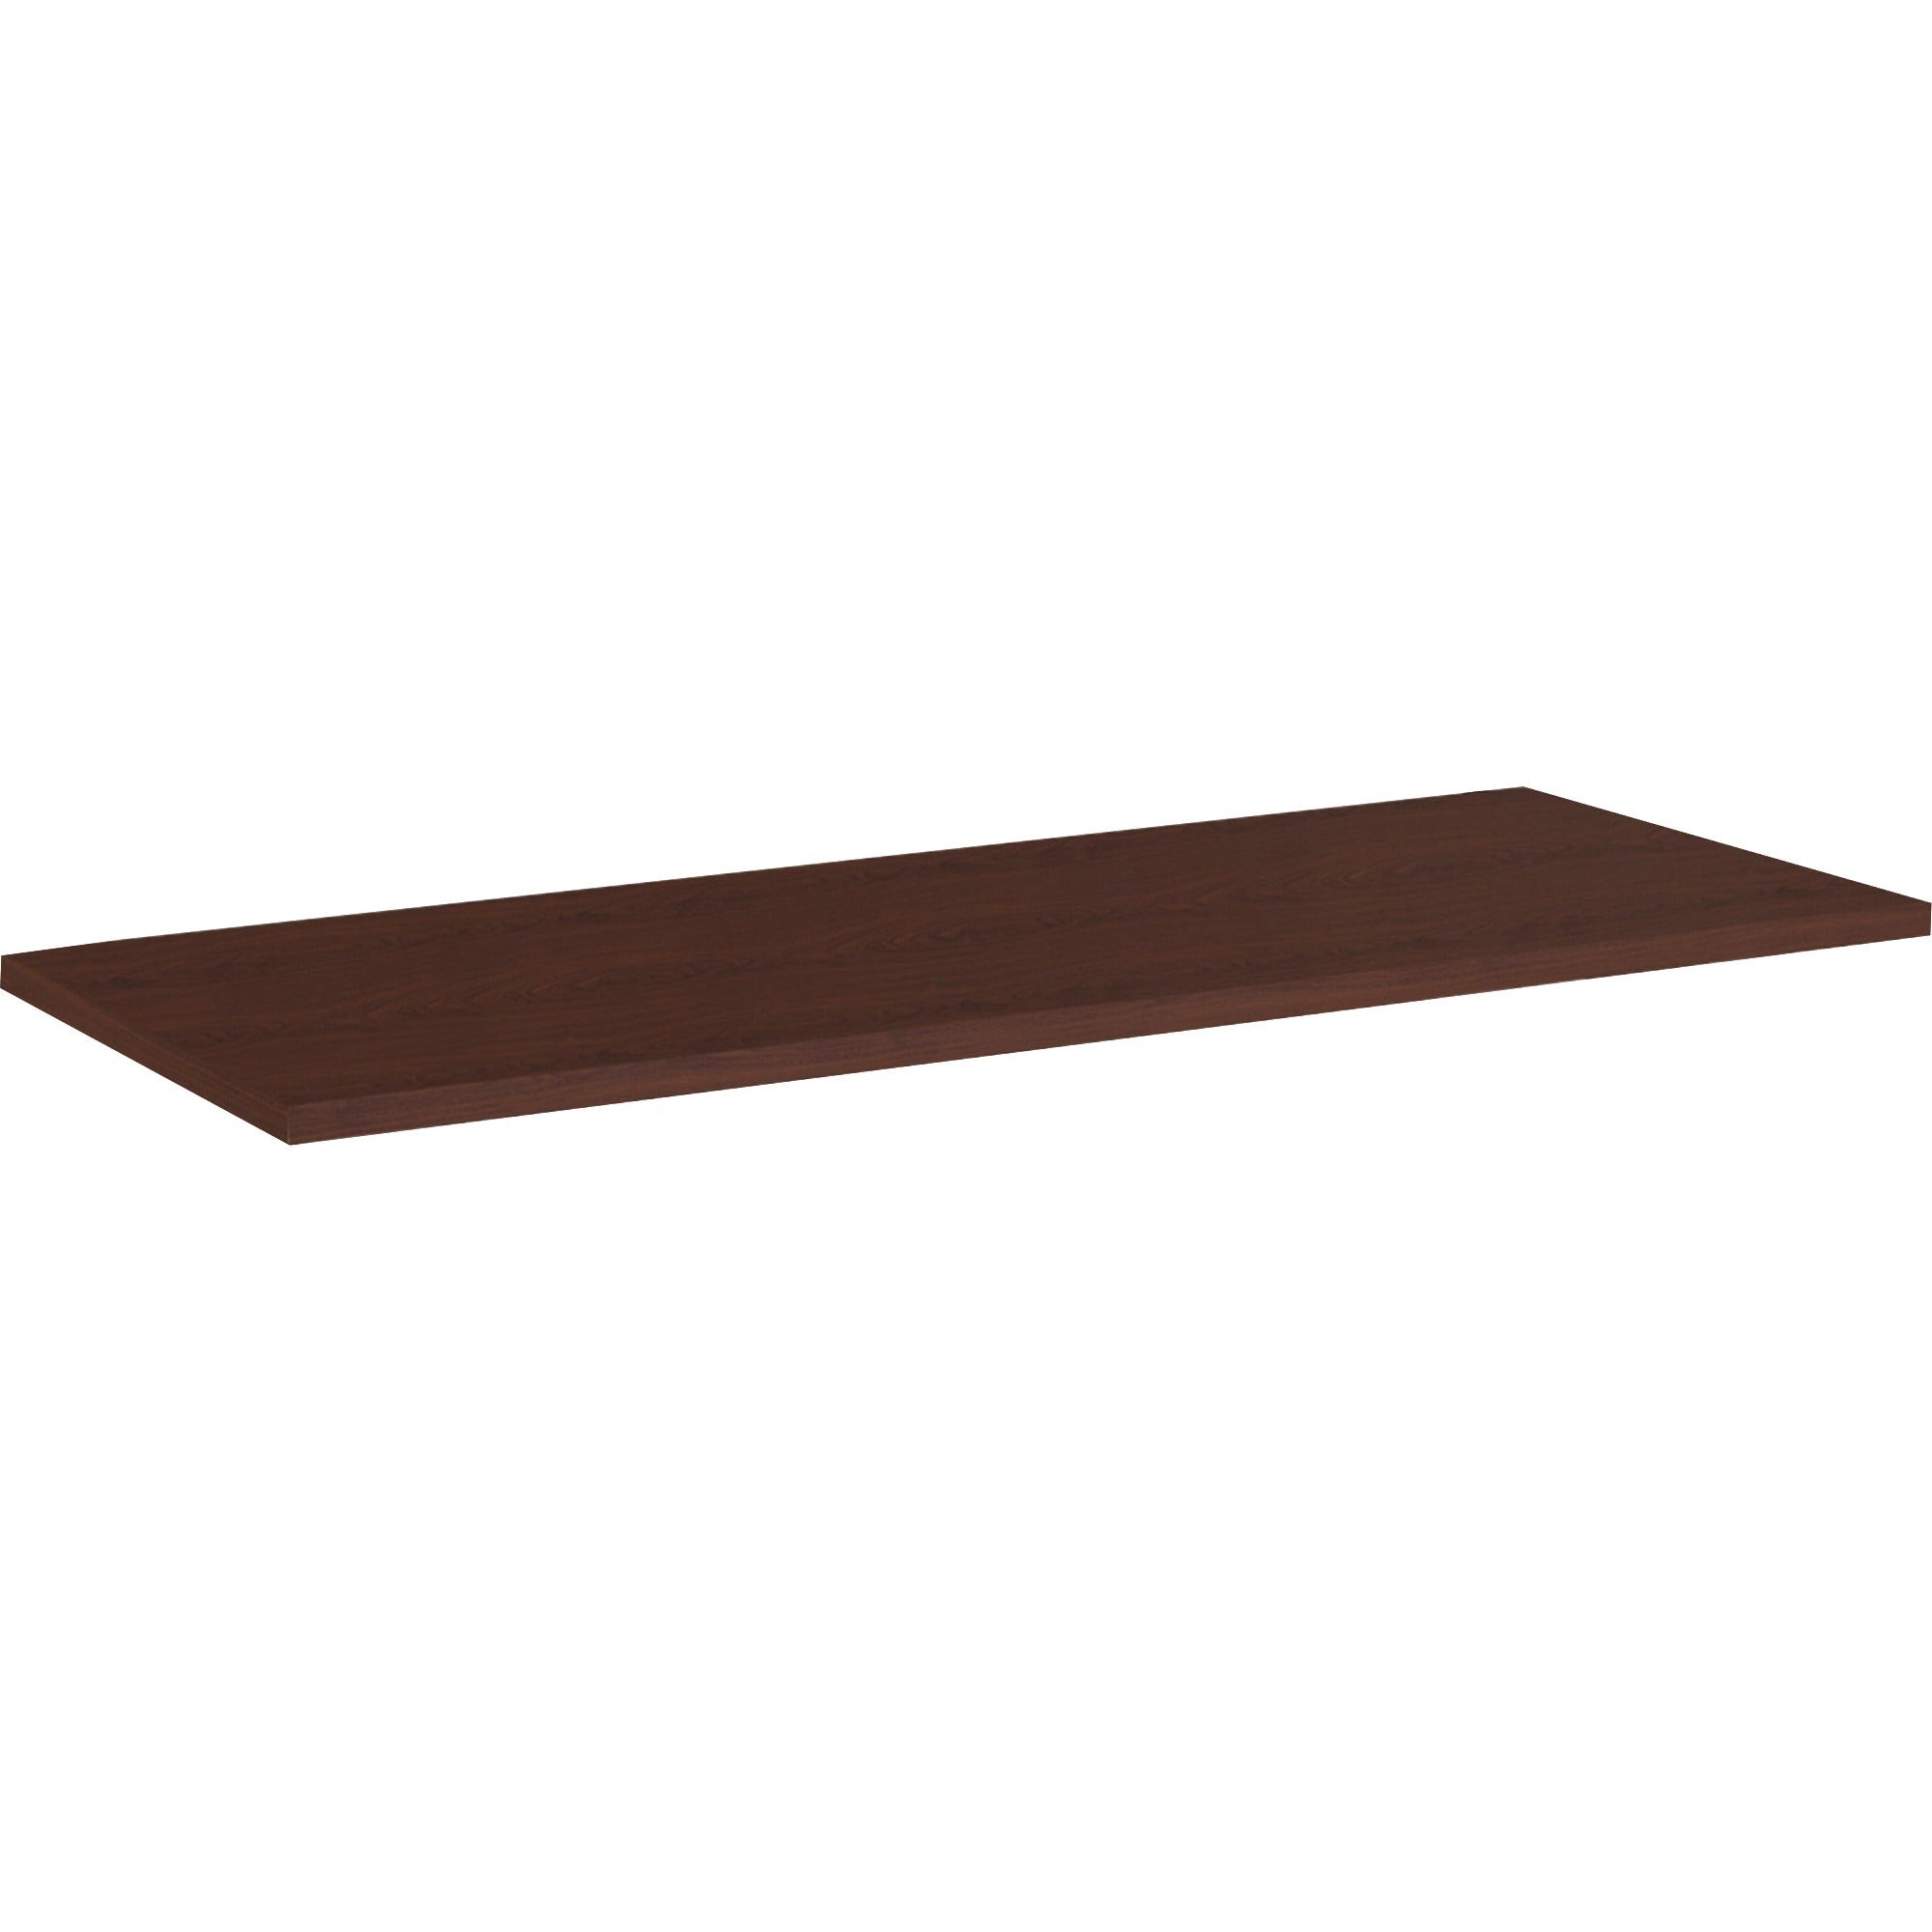 special-t-kingston-72w-table-laminate-tabletop-for-table-topmahogany-rectangle-low-pressure-laminate-lpl-top-72-table-top-length-x-24-table-top-width-x-1-table-top-thickness-1-each_sctsp2472mhg - 1